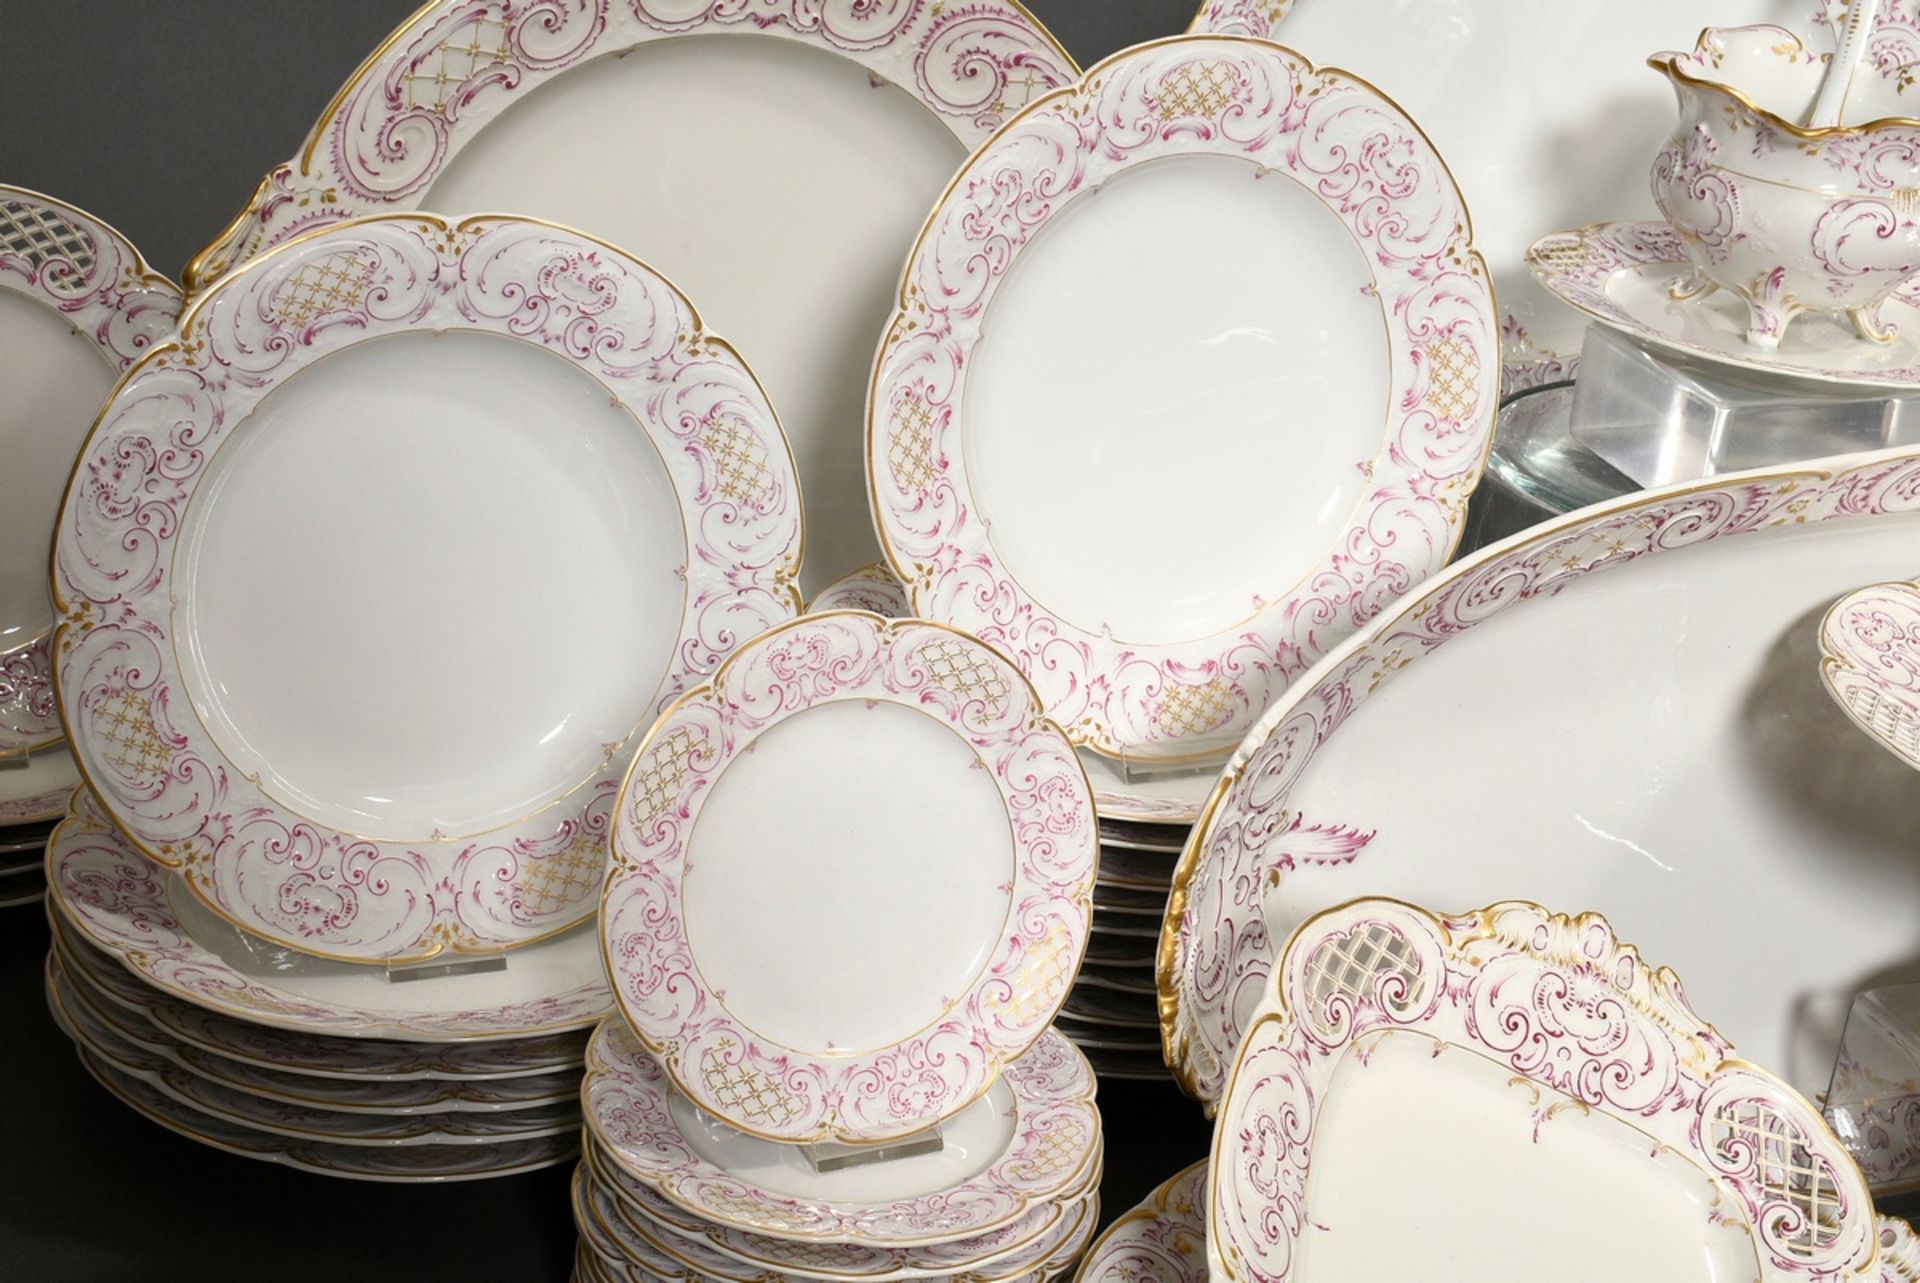 69 Pieces KPM dinner service in Rococo form with purple and gold staffage, red imperial orb mark, c - Image 9 of 22